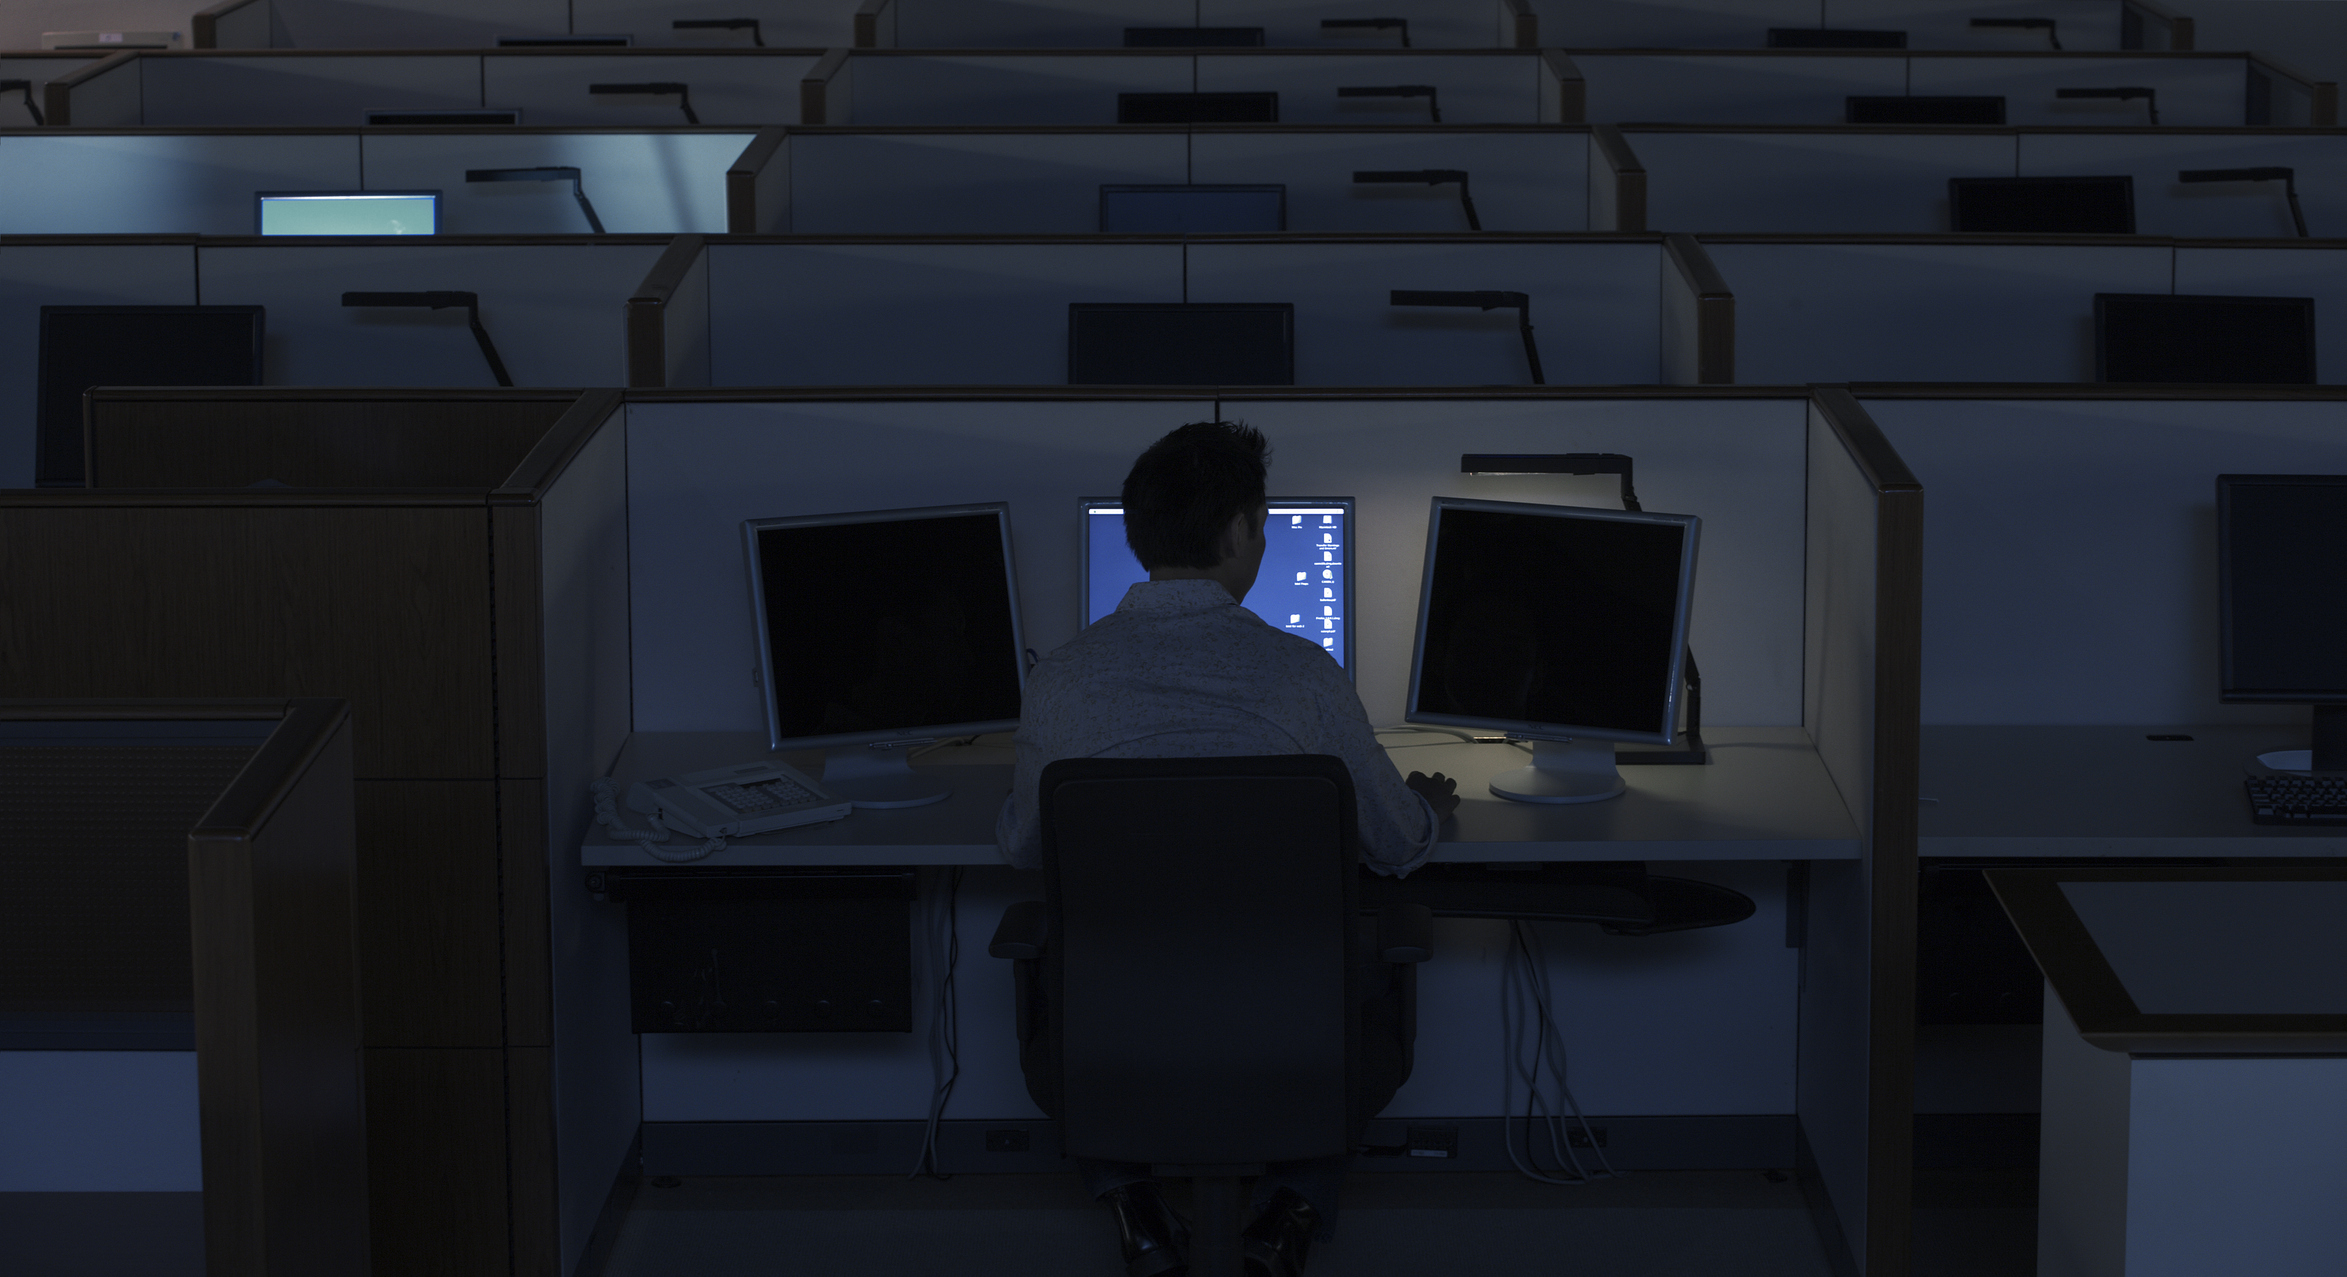 Person at a desk in a dark office with multiple computer screens, suggesting late-night work